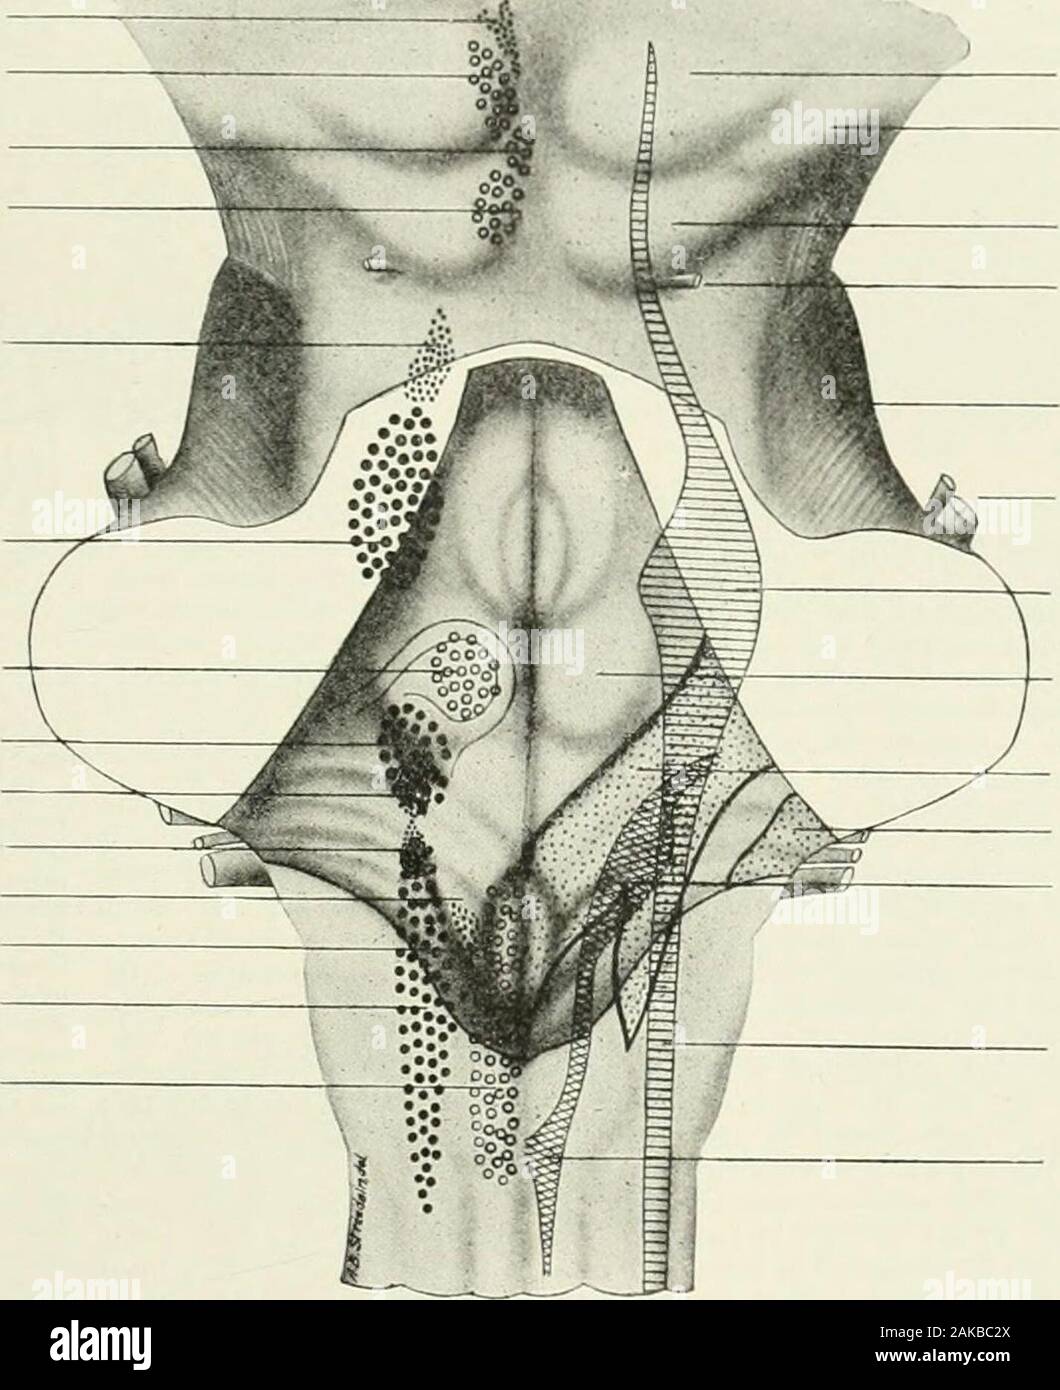 A reference handbook of the medical sciences, embracing the entire range of scientific and practical medicine and allied science . the meta-pore or foramen of Magendie, by which the cavity ofthe ventricle communicates with the subarachnoid of figures from tlie older authors and has added manynew figures (vol. ii., Taf. llo, M&gt;, 40) illustrative of thegreat variability of these structures. Fig. 90.) illu.s-tratcs .some fi-atures of the superficial anatomy of thisregion, upon which the underlying nuclei of the cere-bral nerves have been projected. The motor nucleiare shown on the left and the Stock Photo